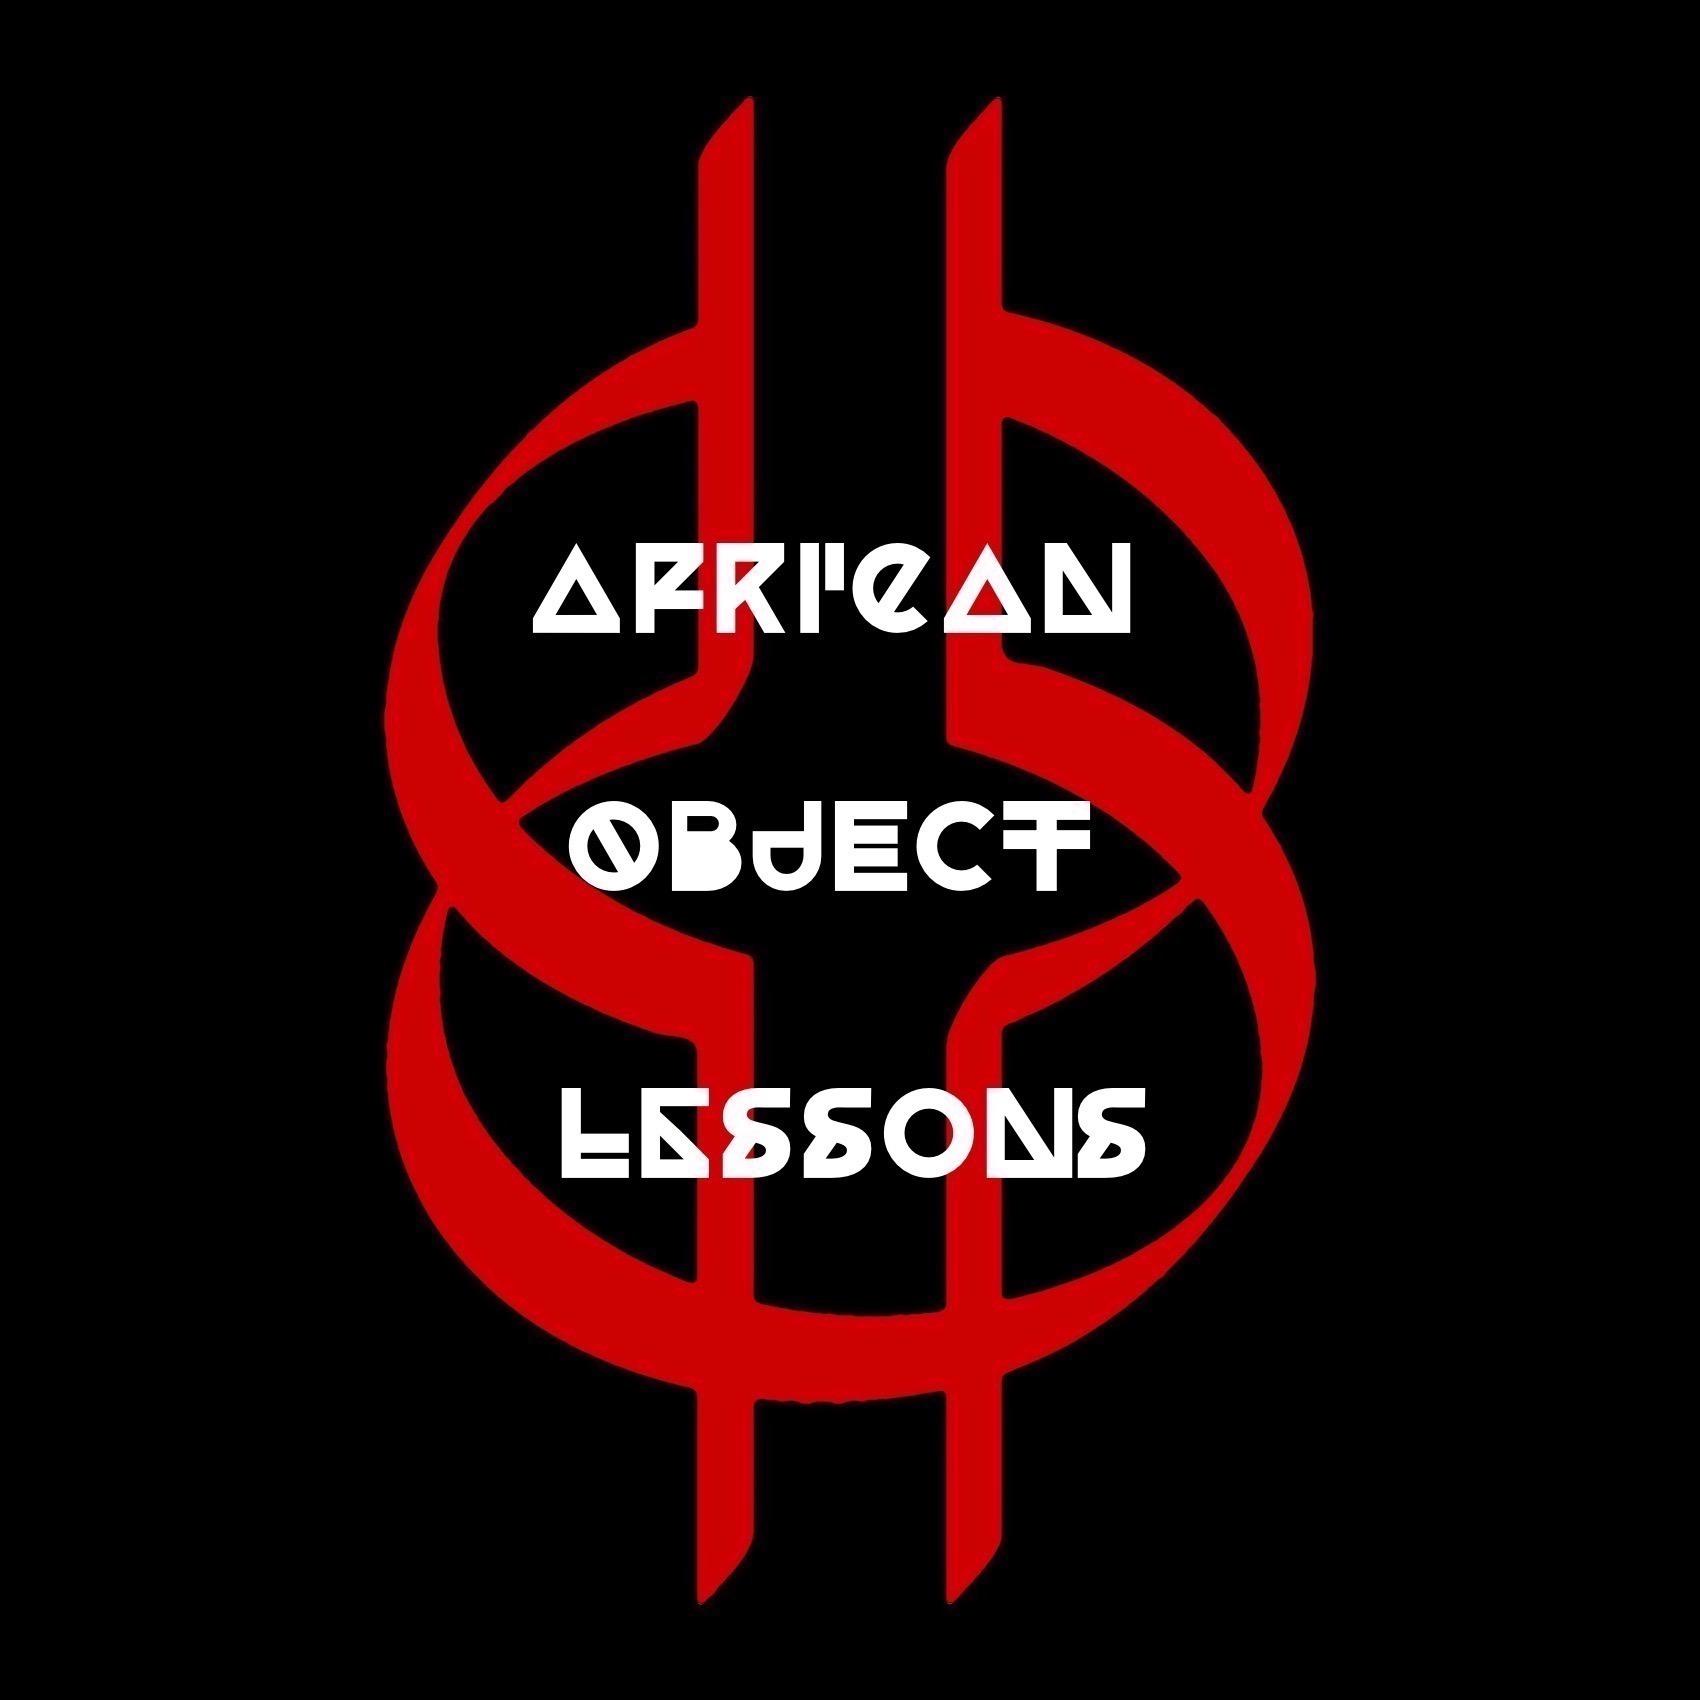 African Object Lessons